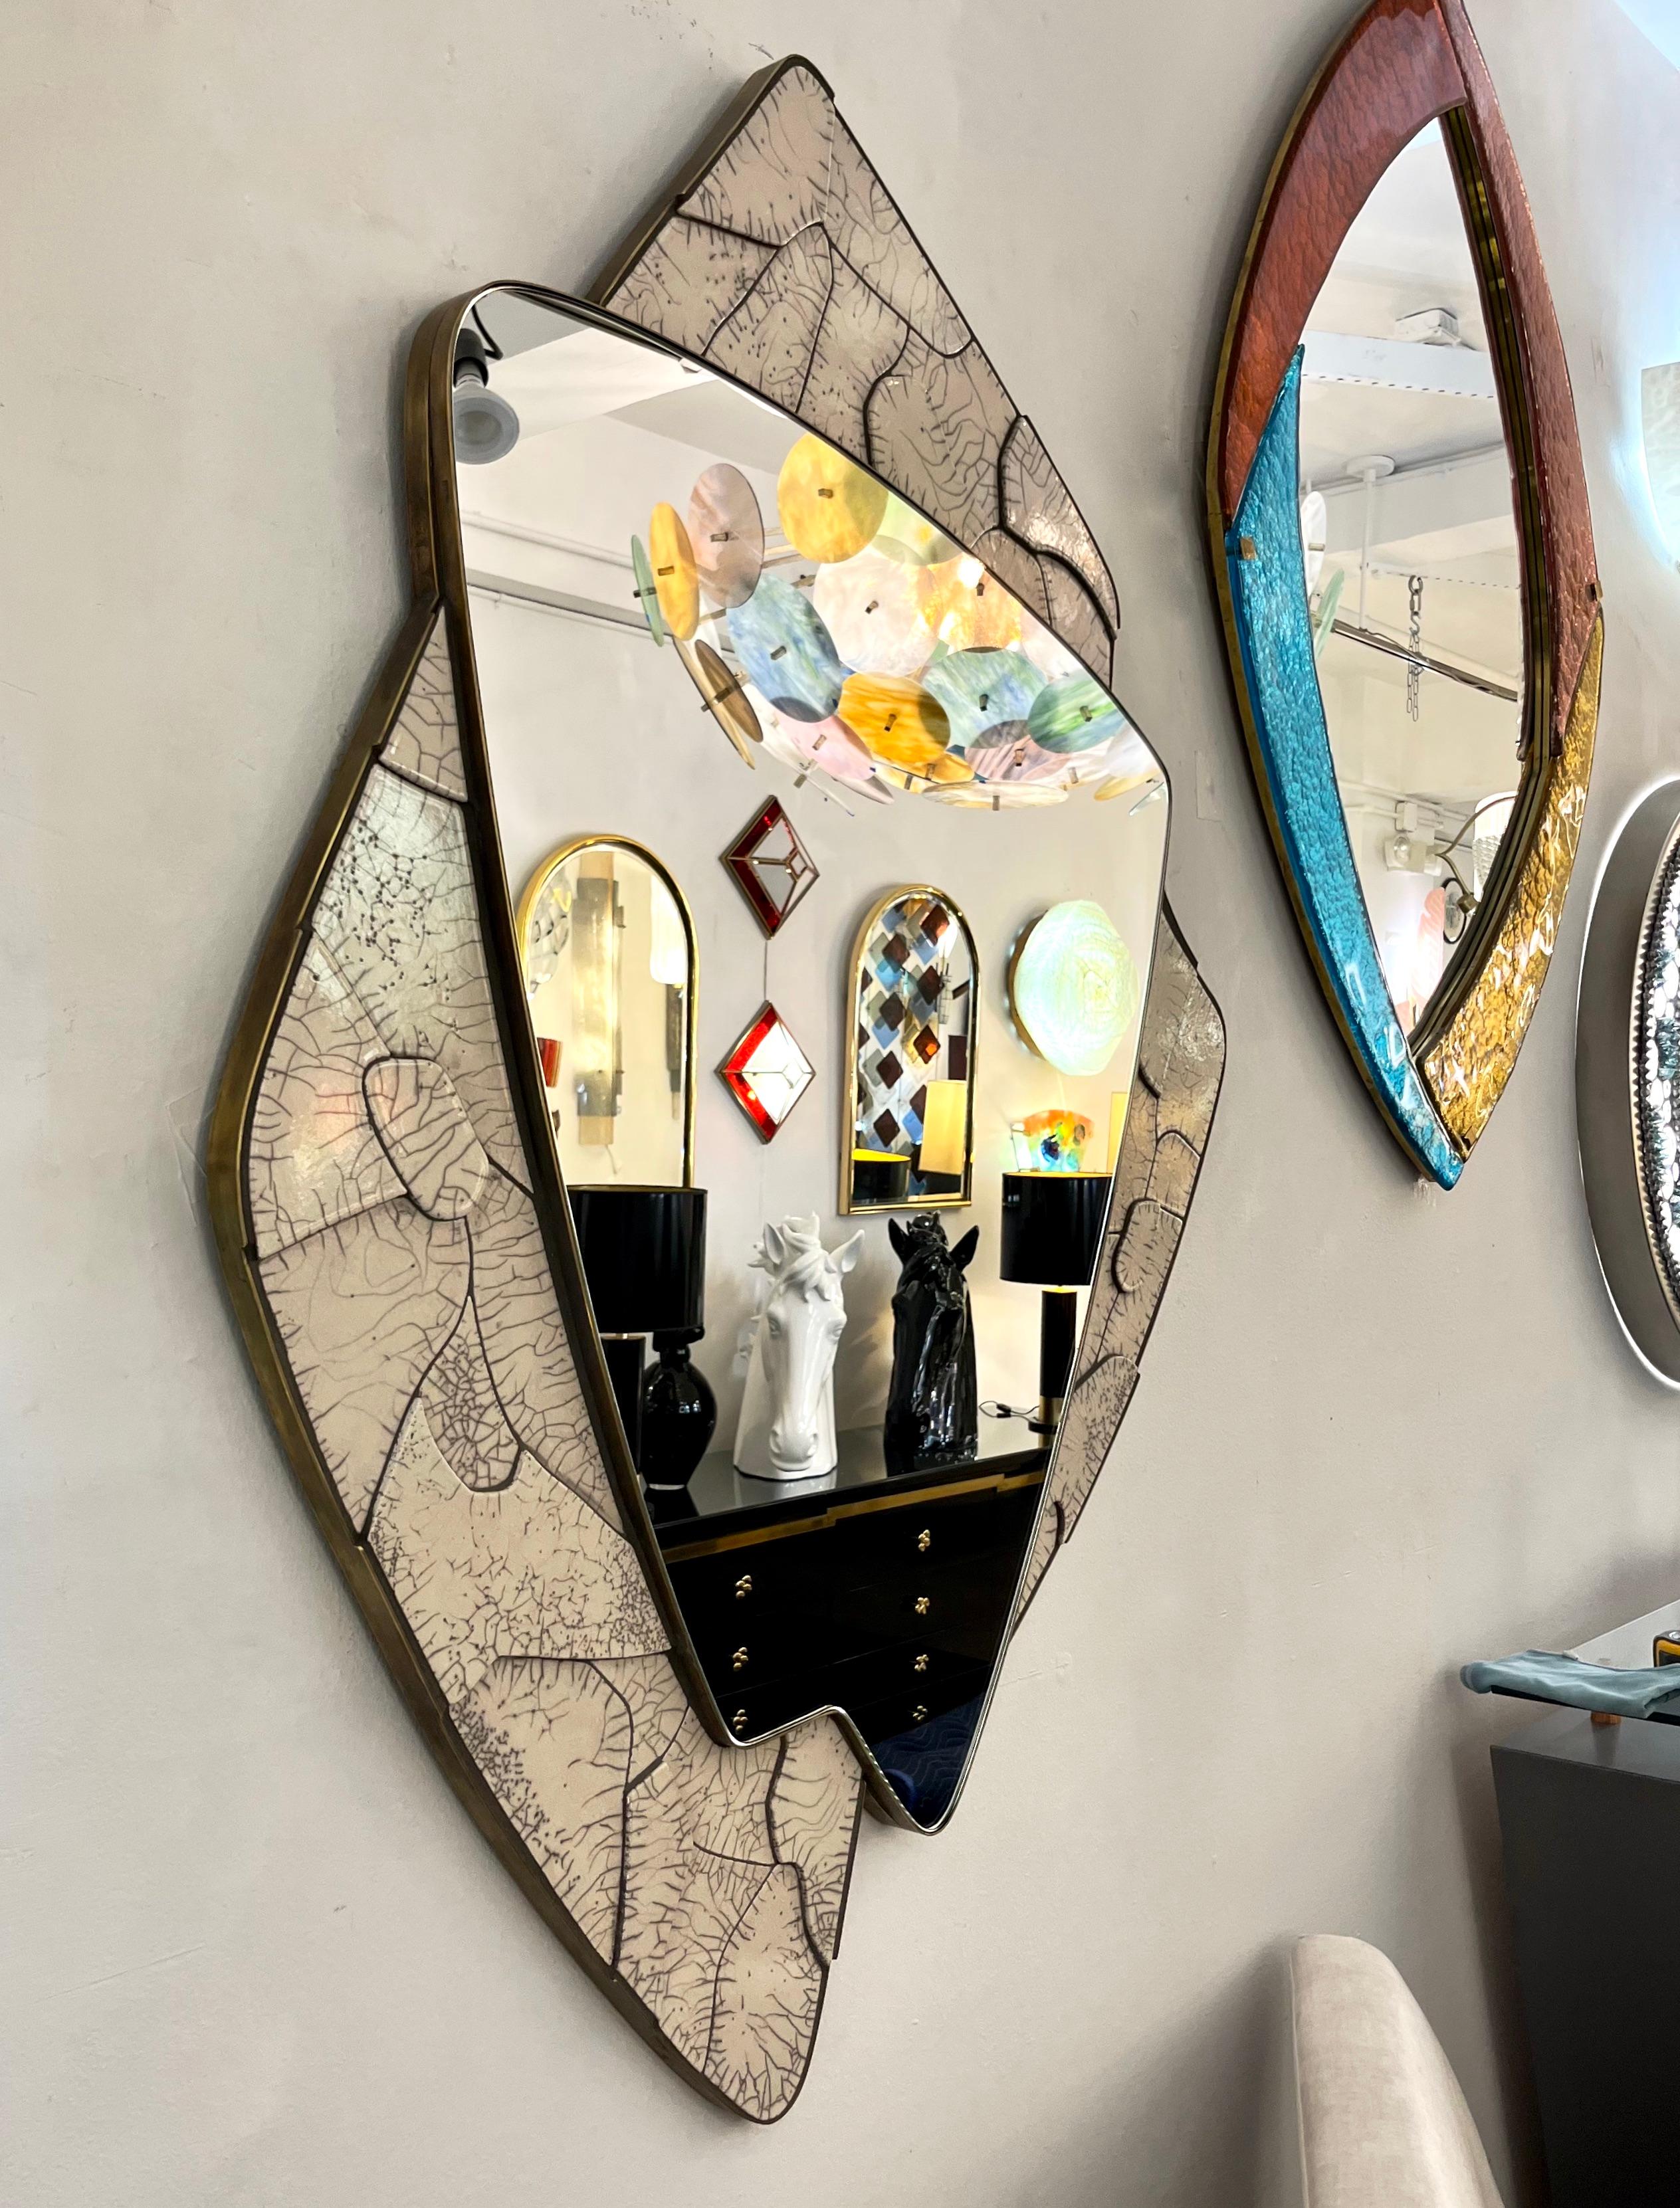 Unique Italian design mirror sculpture, organic modern Work of Art in ceramic, entirely handcrafted in Italy, worked with a deconstructed pattern in a Japanese style. Different thicknesses create steps and movement, the central mirror plate in